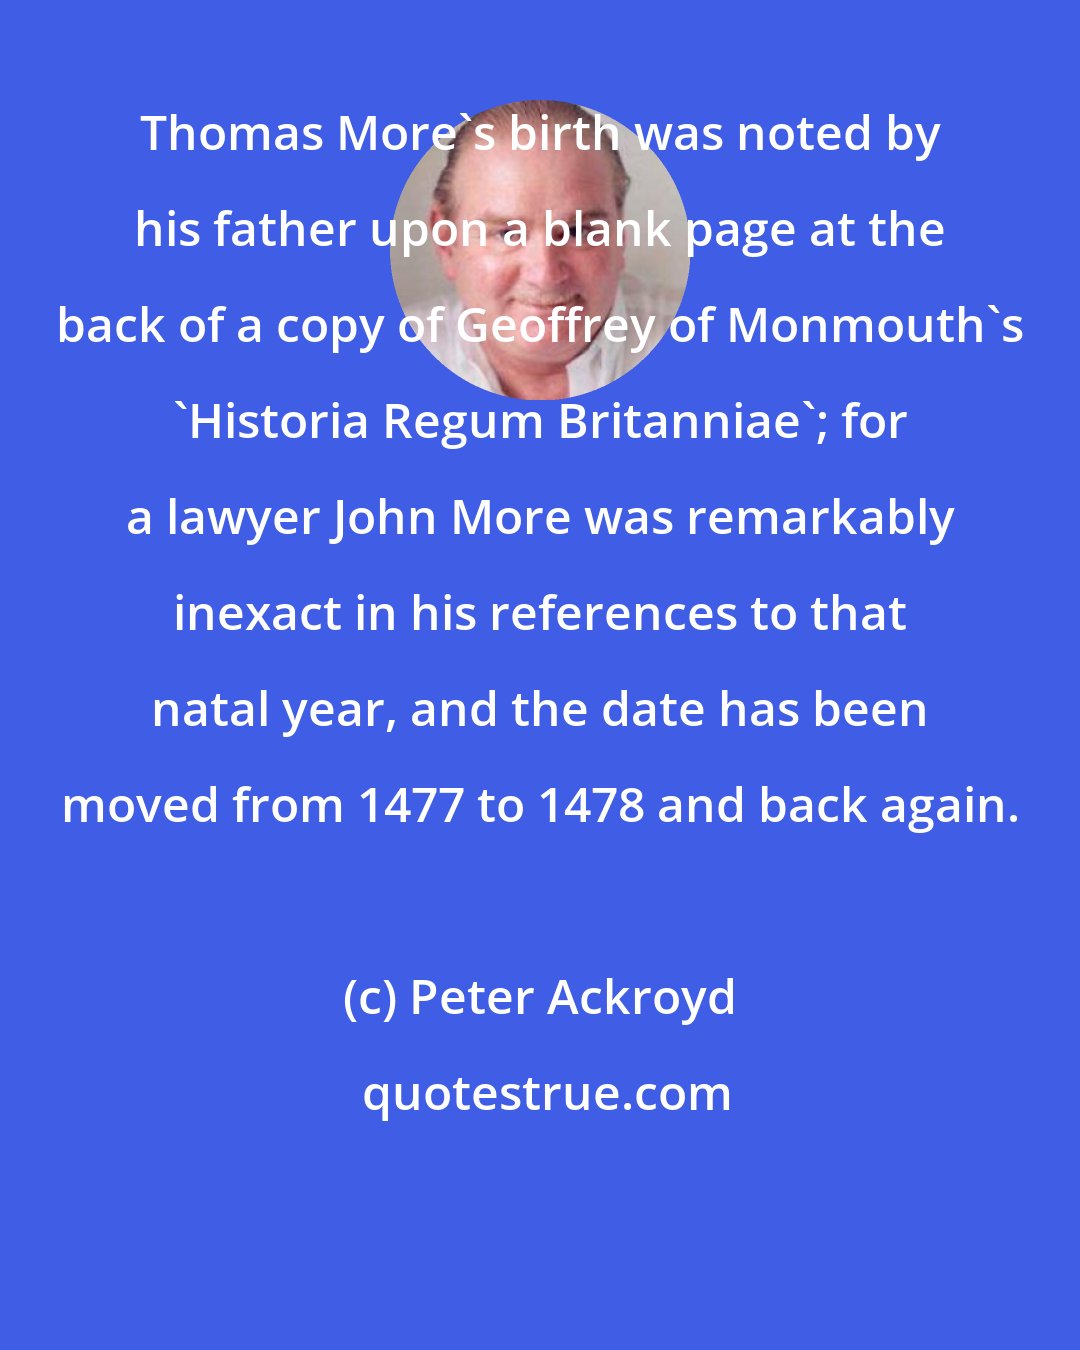 Peter Ackroyd: Thomas More's birth was noted by his father upon a blank page at the back of a copy of Geoffrey of Monmouth's 'Historia Regum Britanniae'; for a lawyer John More was remarkably inexact in his references to that natal year, and the date has been moved from 1477 to 1478 and back again.